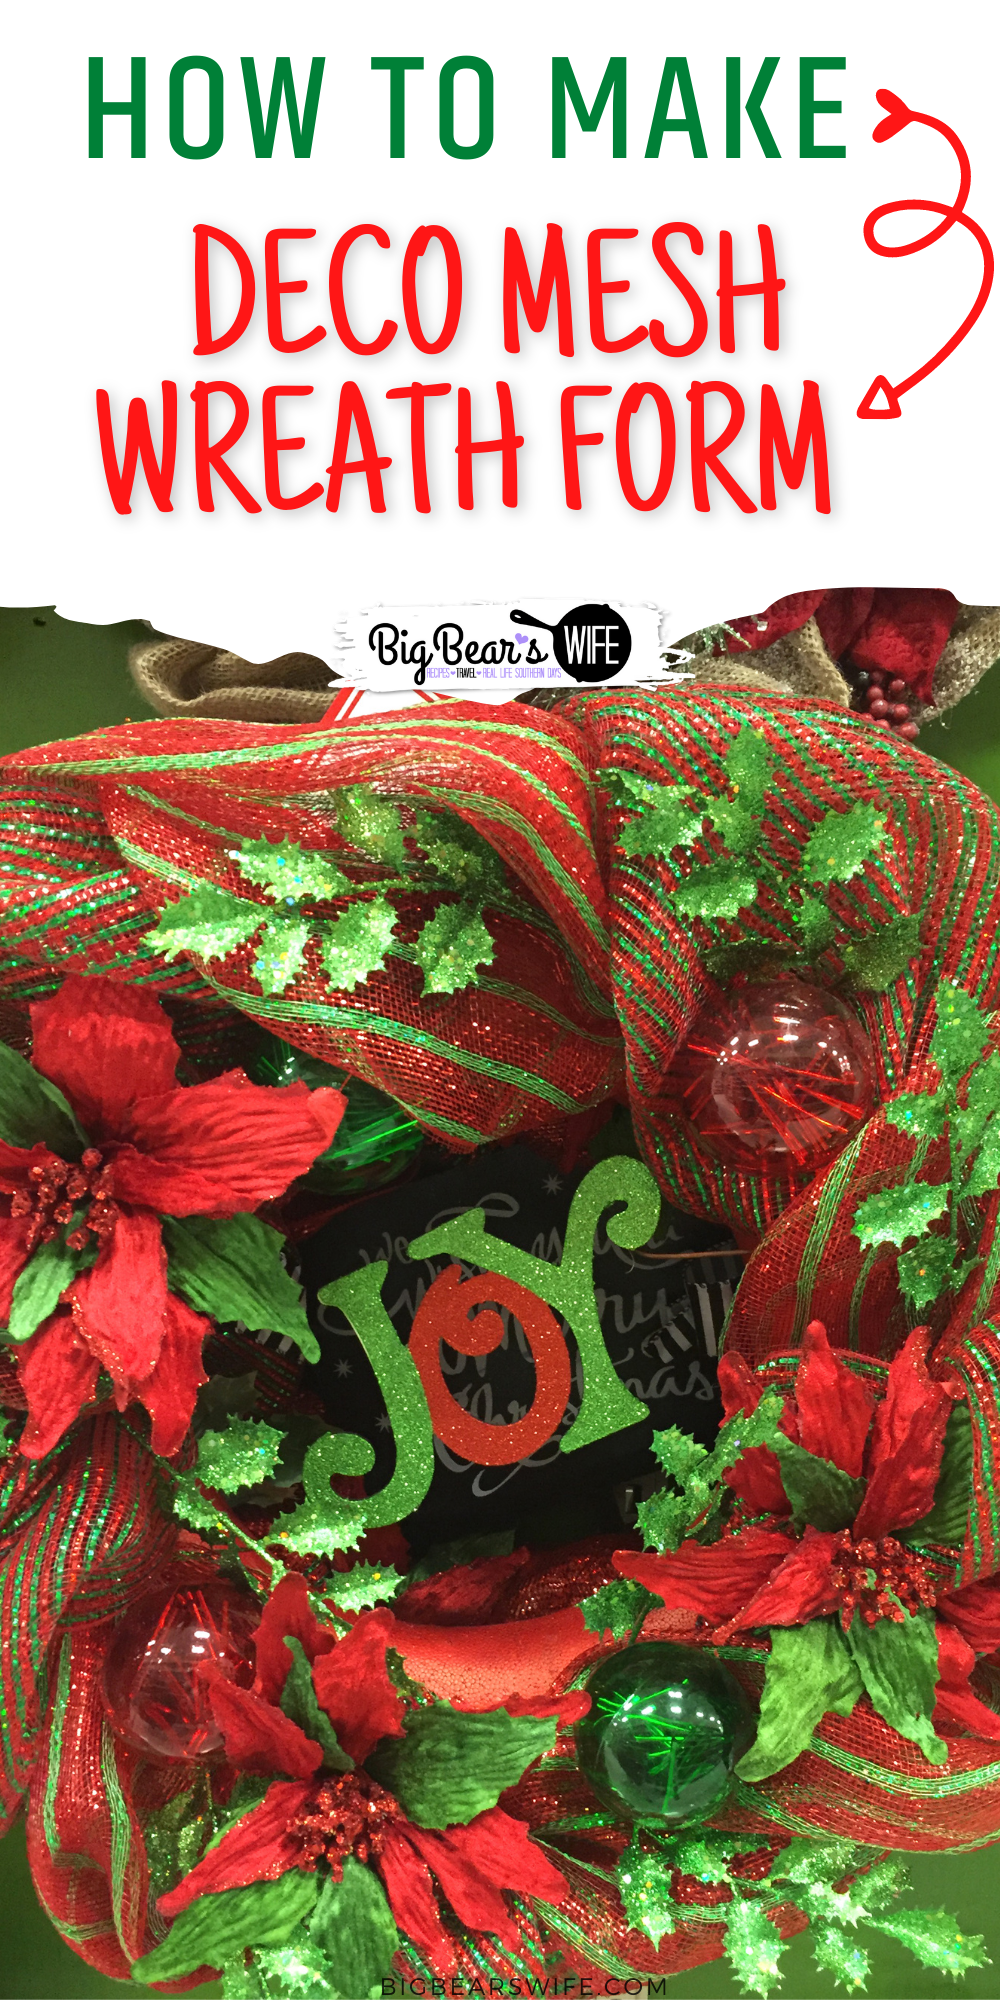 Need a Deco Mesh Wreath Form to use for homemade Deco Mesh Wreaths? This easy photo step by step tutorial can show you how to make one!    via @bigbearswife